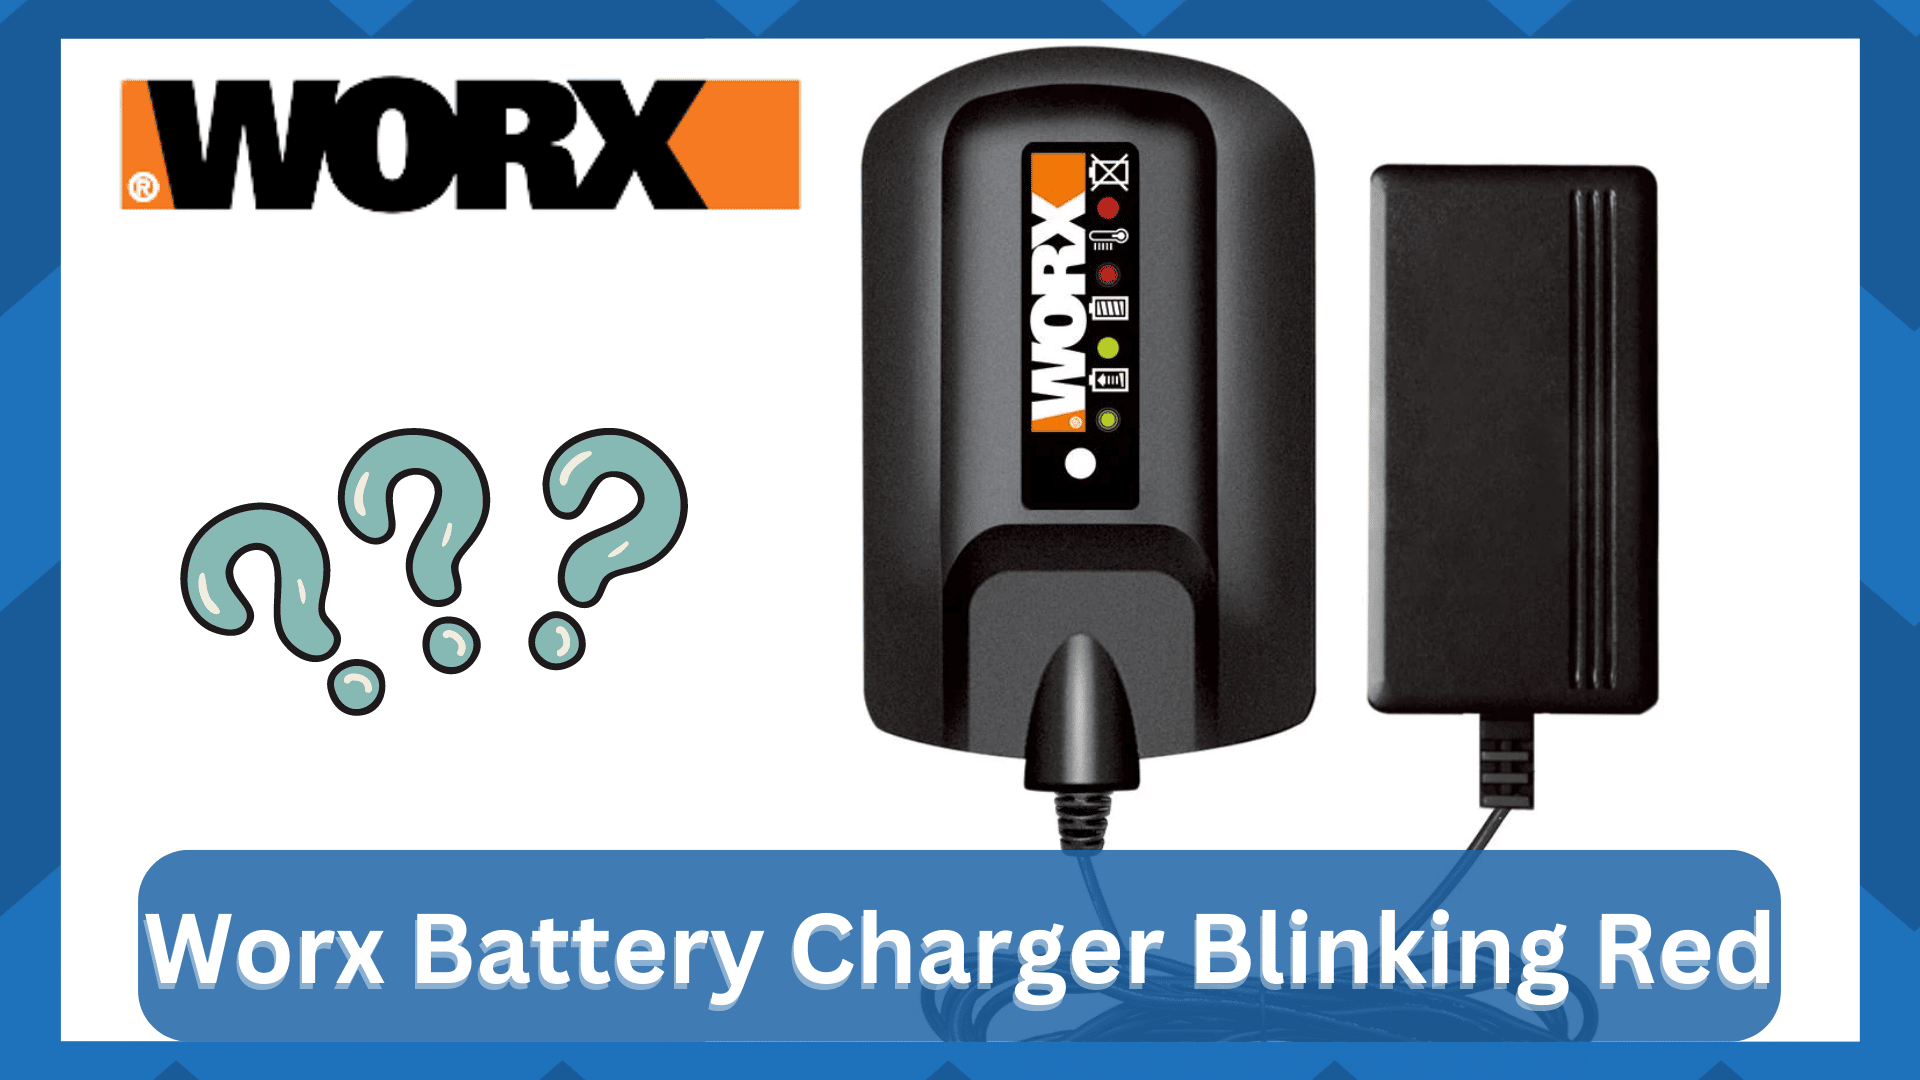 Worx Battery Charger Blinking Red